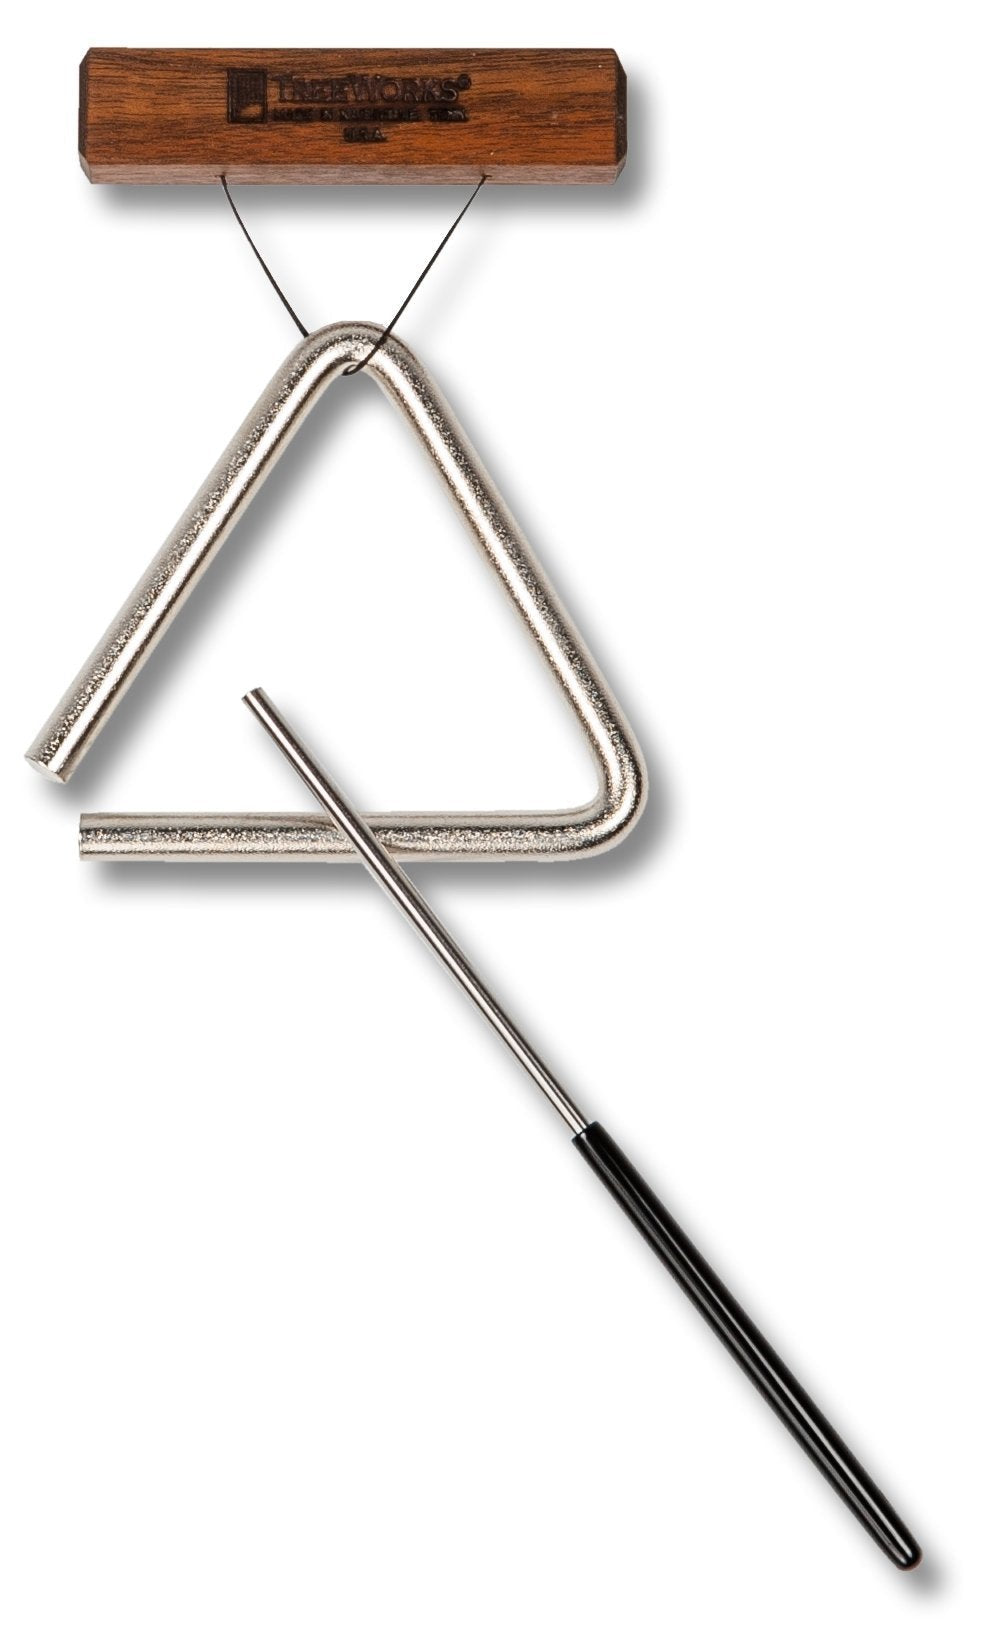 TreeWorks Chimes 4" Triangle with Beater and Holder — MADE IN U.S.A. — Professional Studio-Grade Solid Steel, Hand Bent in Nashville Tennessee for a Pure Tone, 4-Inch (TRE-HS04)